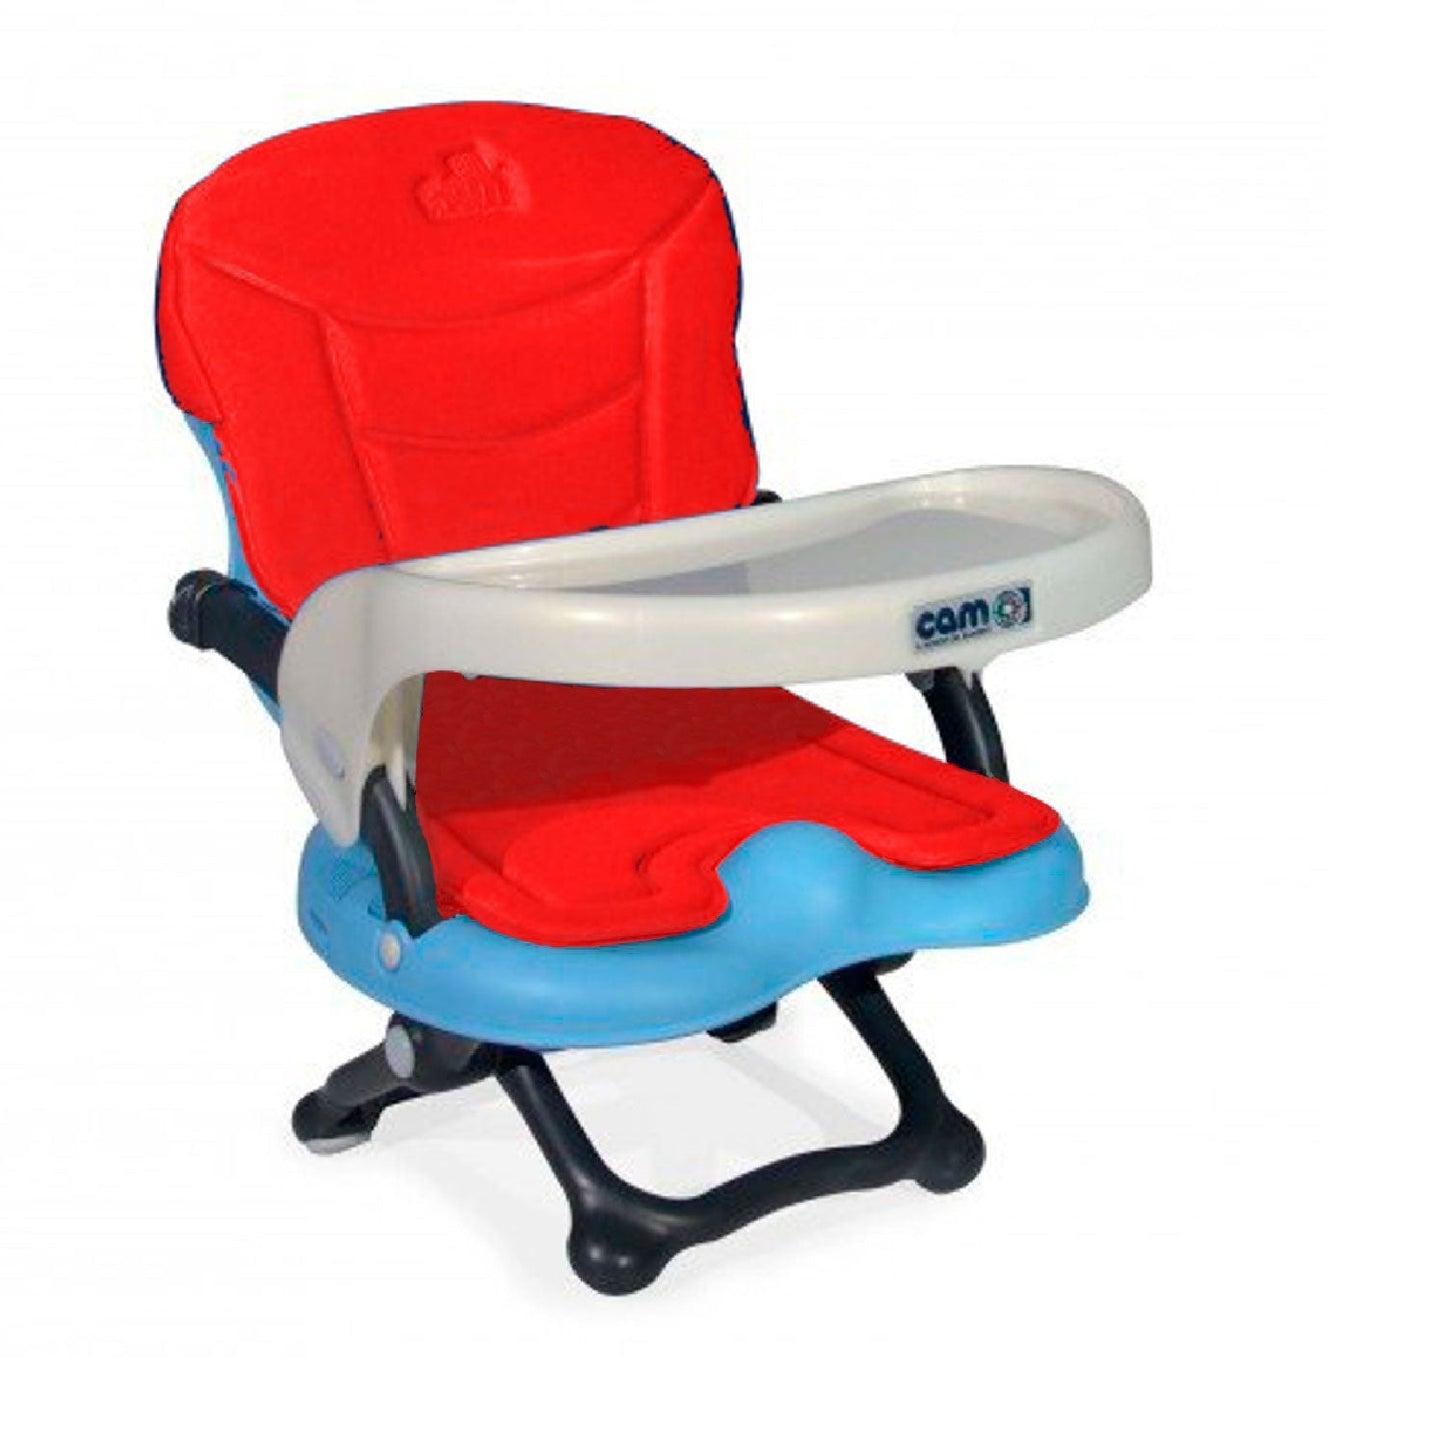 Cam - Universal chair raiser for Smarty Pop table